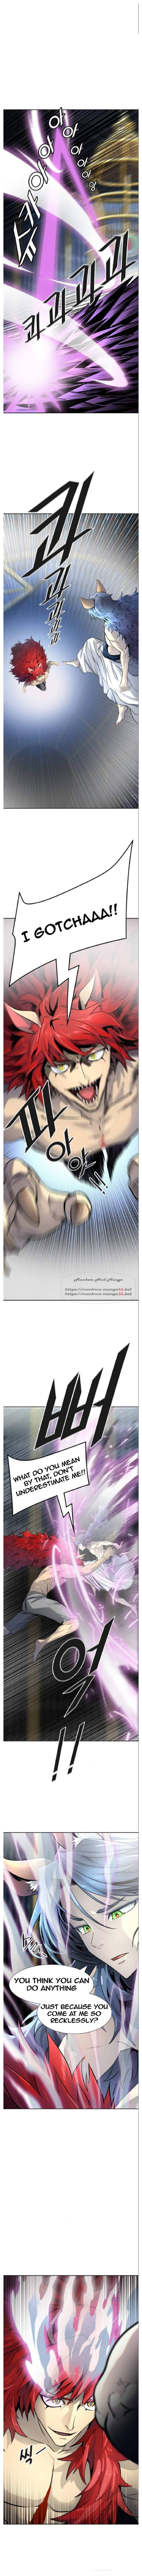 tower of god 515, tower of god 515, Read tower of god 515, tower of god 515 Manga, tower of god 515 english, tower of god 515 raw manga, tower of god 515 online, tower of god 515 high quality, tower of god 515 chapter, tower of god 515 manga scan